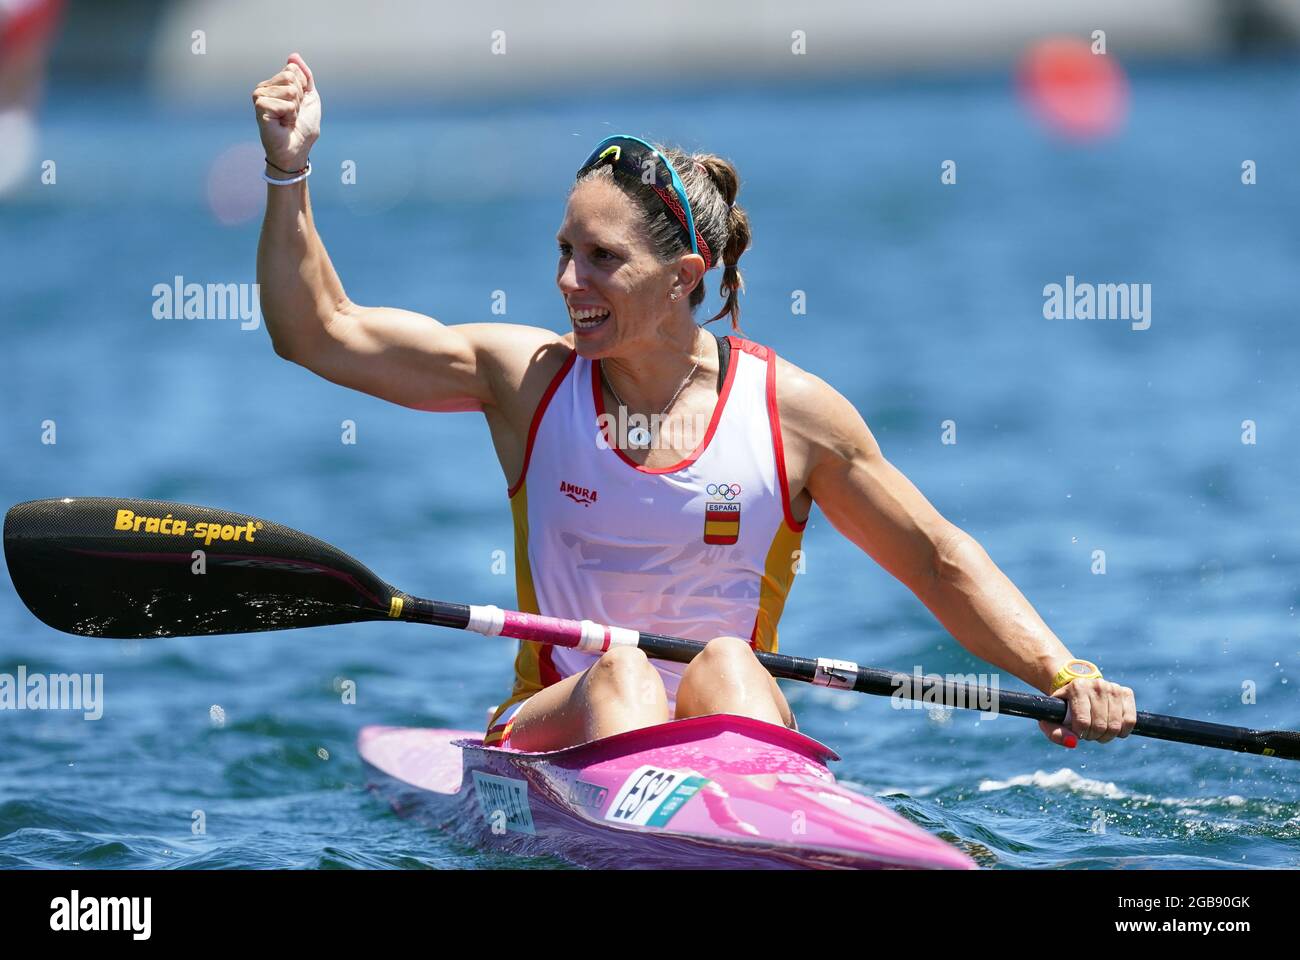 Kayak Following High Resolution Stock Photography and Images - Alamy